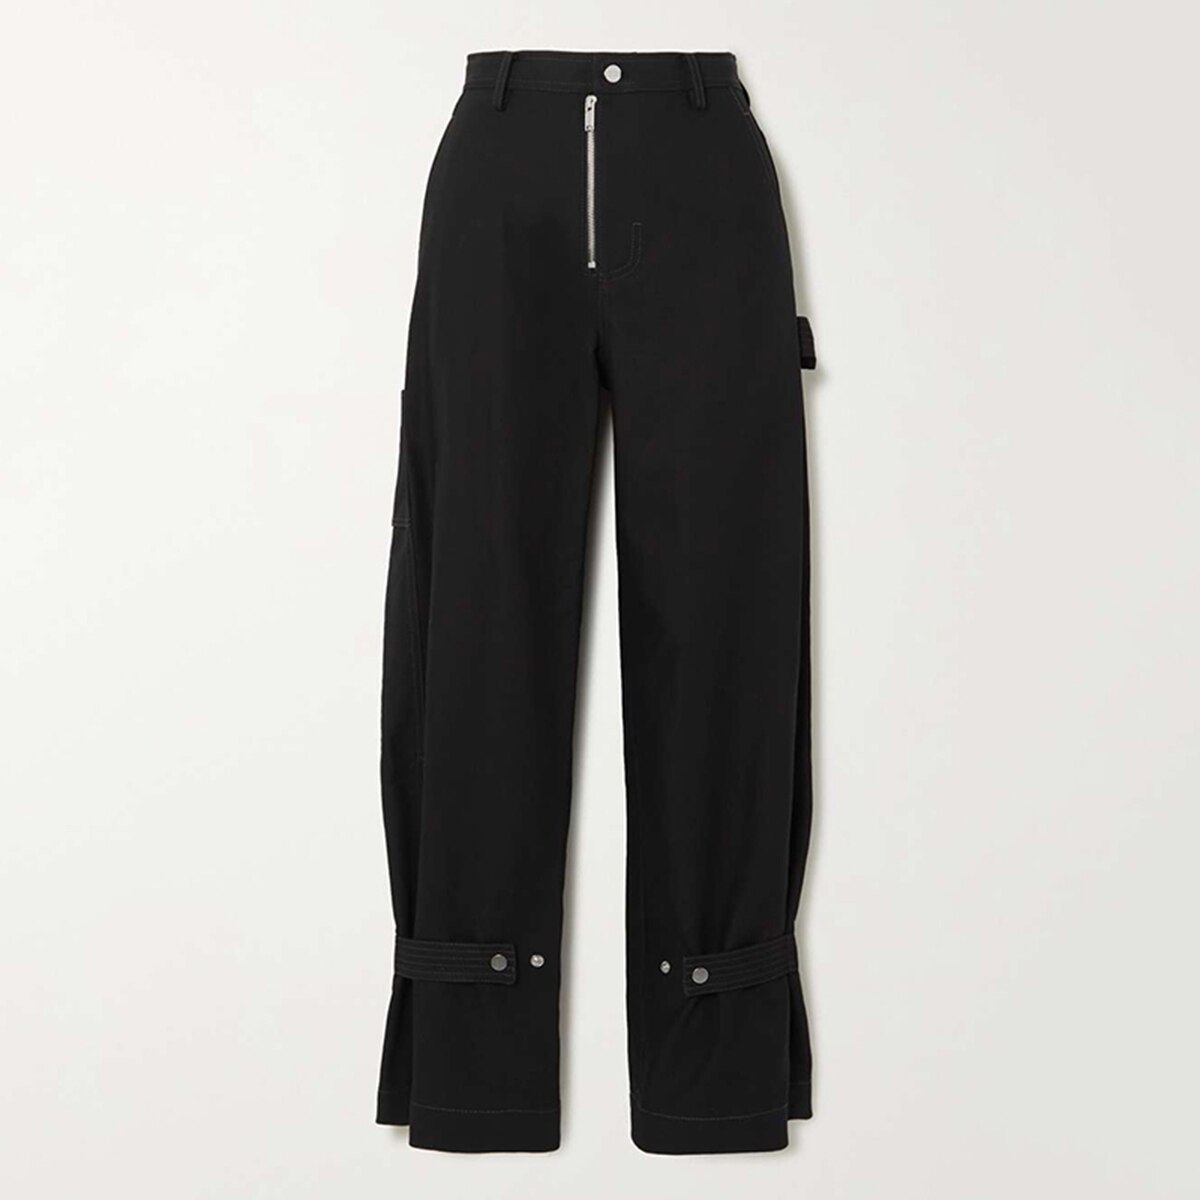 Yeezzi-Fashion-Female-Pants-Formal-Trousers-Loose-High-Waist-Solid-Color-Zipper-Wide-Leg-Pants-For-5